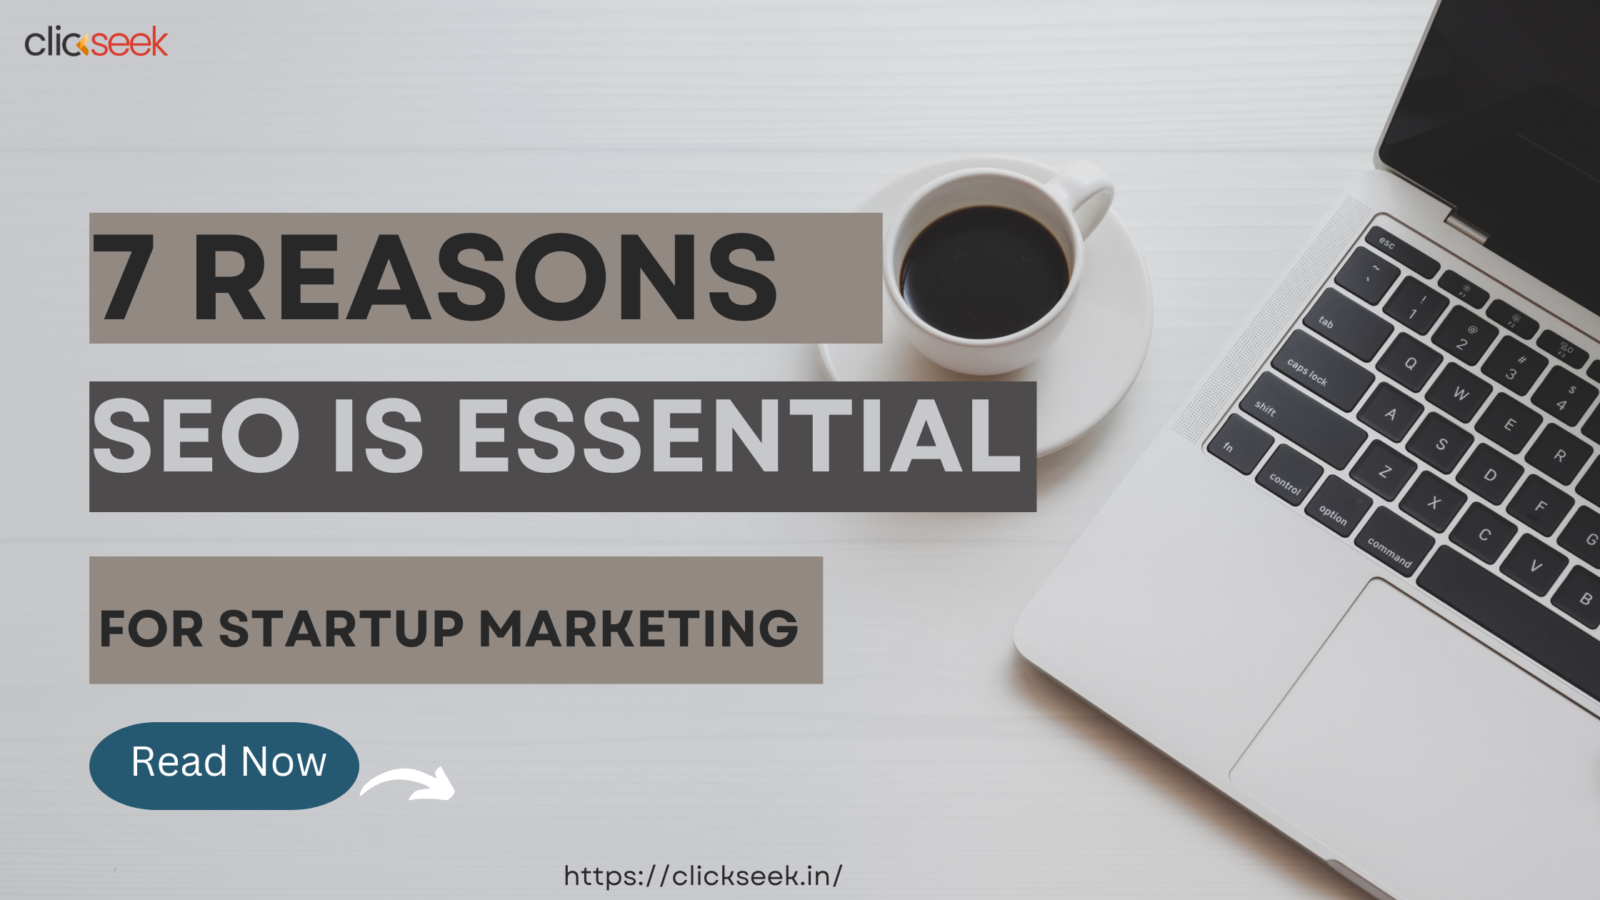 7 reasons SEO is essential for Startup marketing